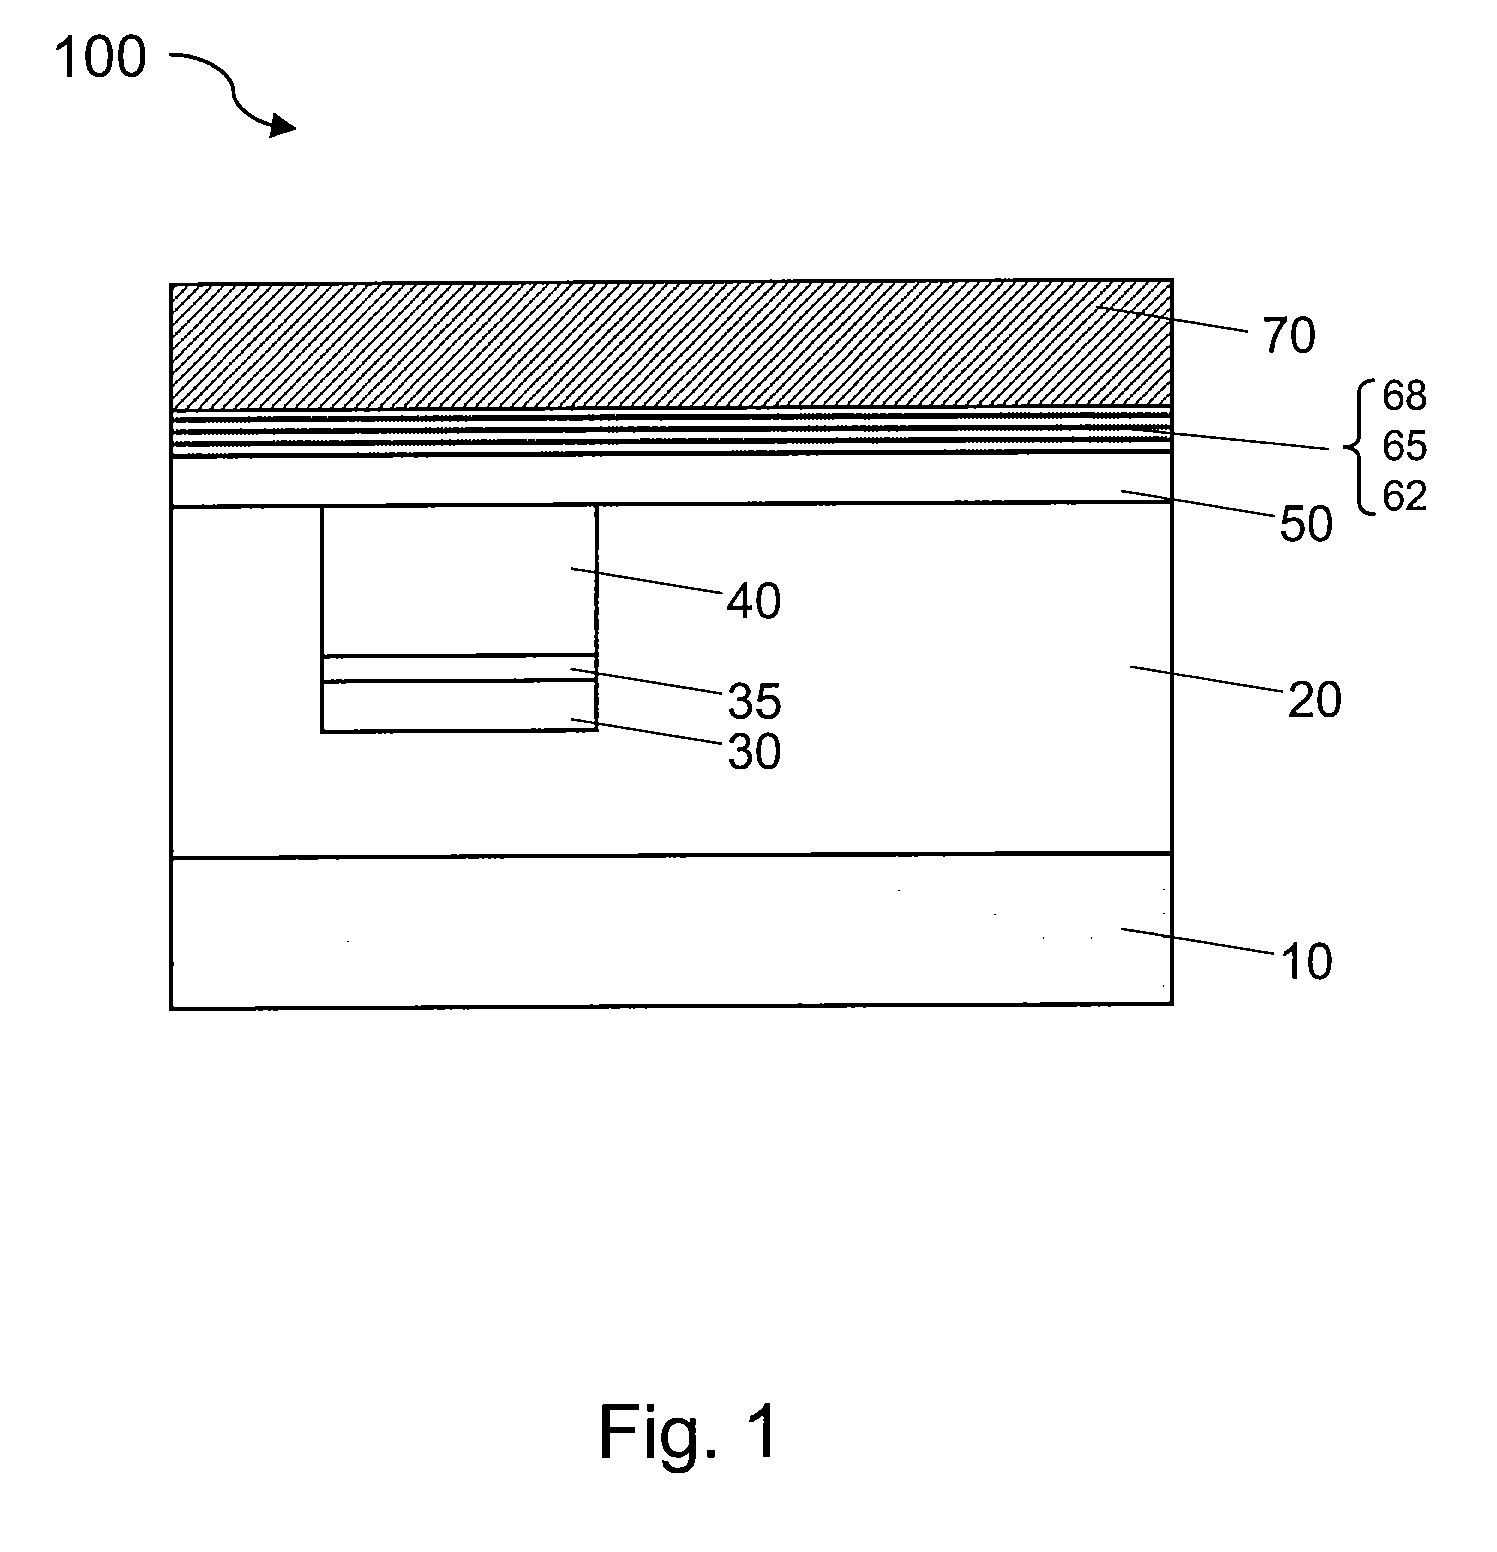 TFT floating gate memory cell structures